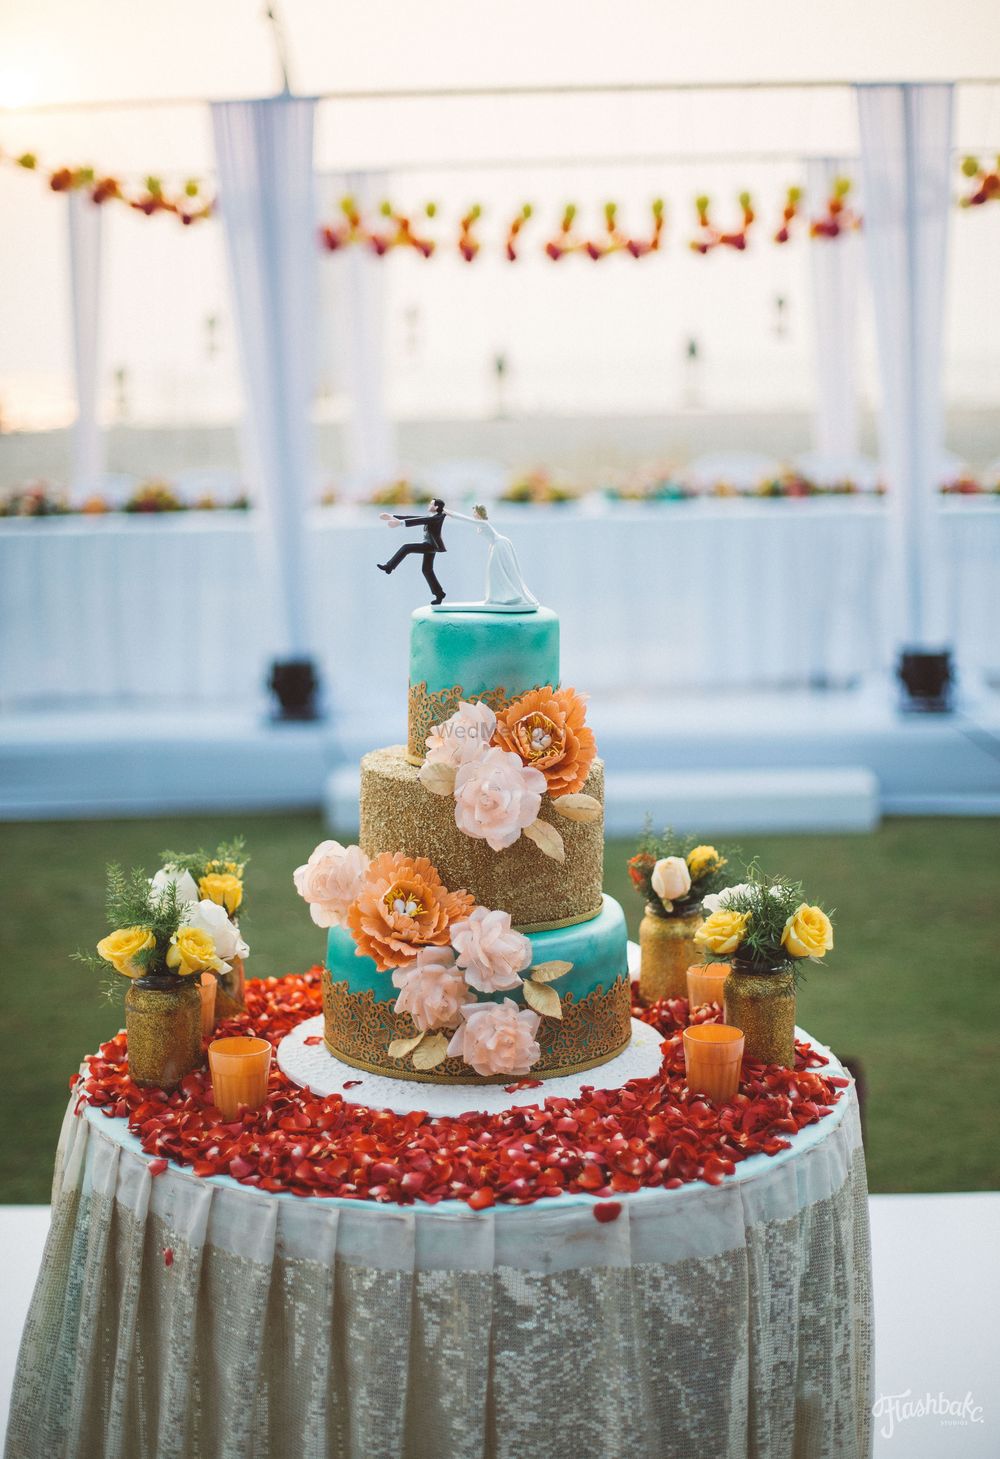 Photo of 3 tier wedding cake in teal and gold